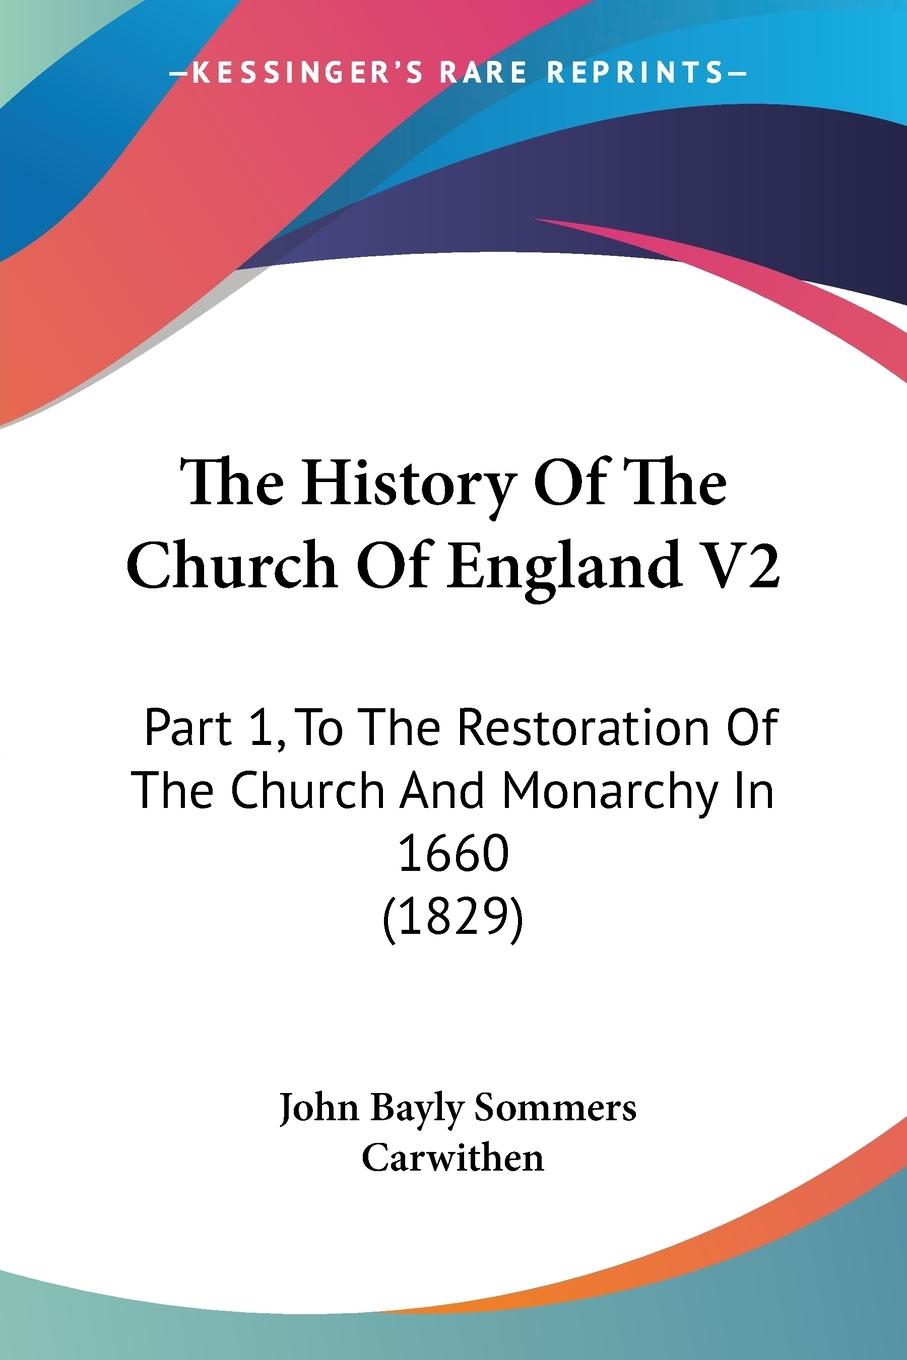 The History Of The Church Of England V2 - Carwithen, John Bayly Sommers